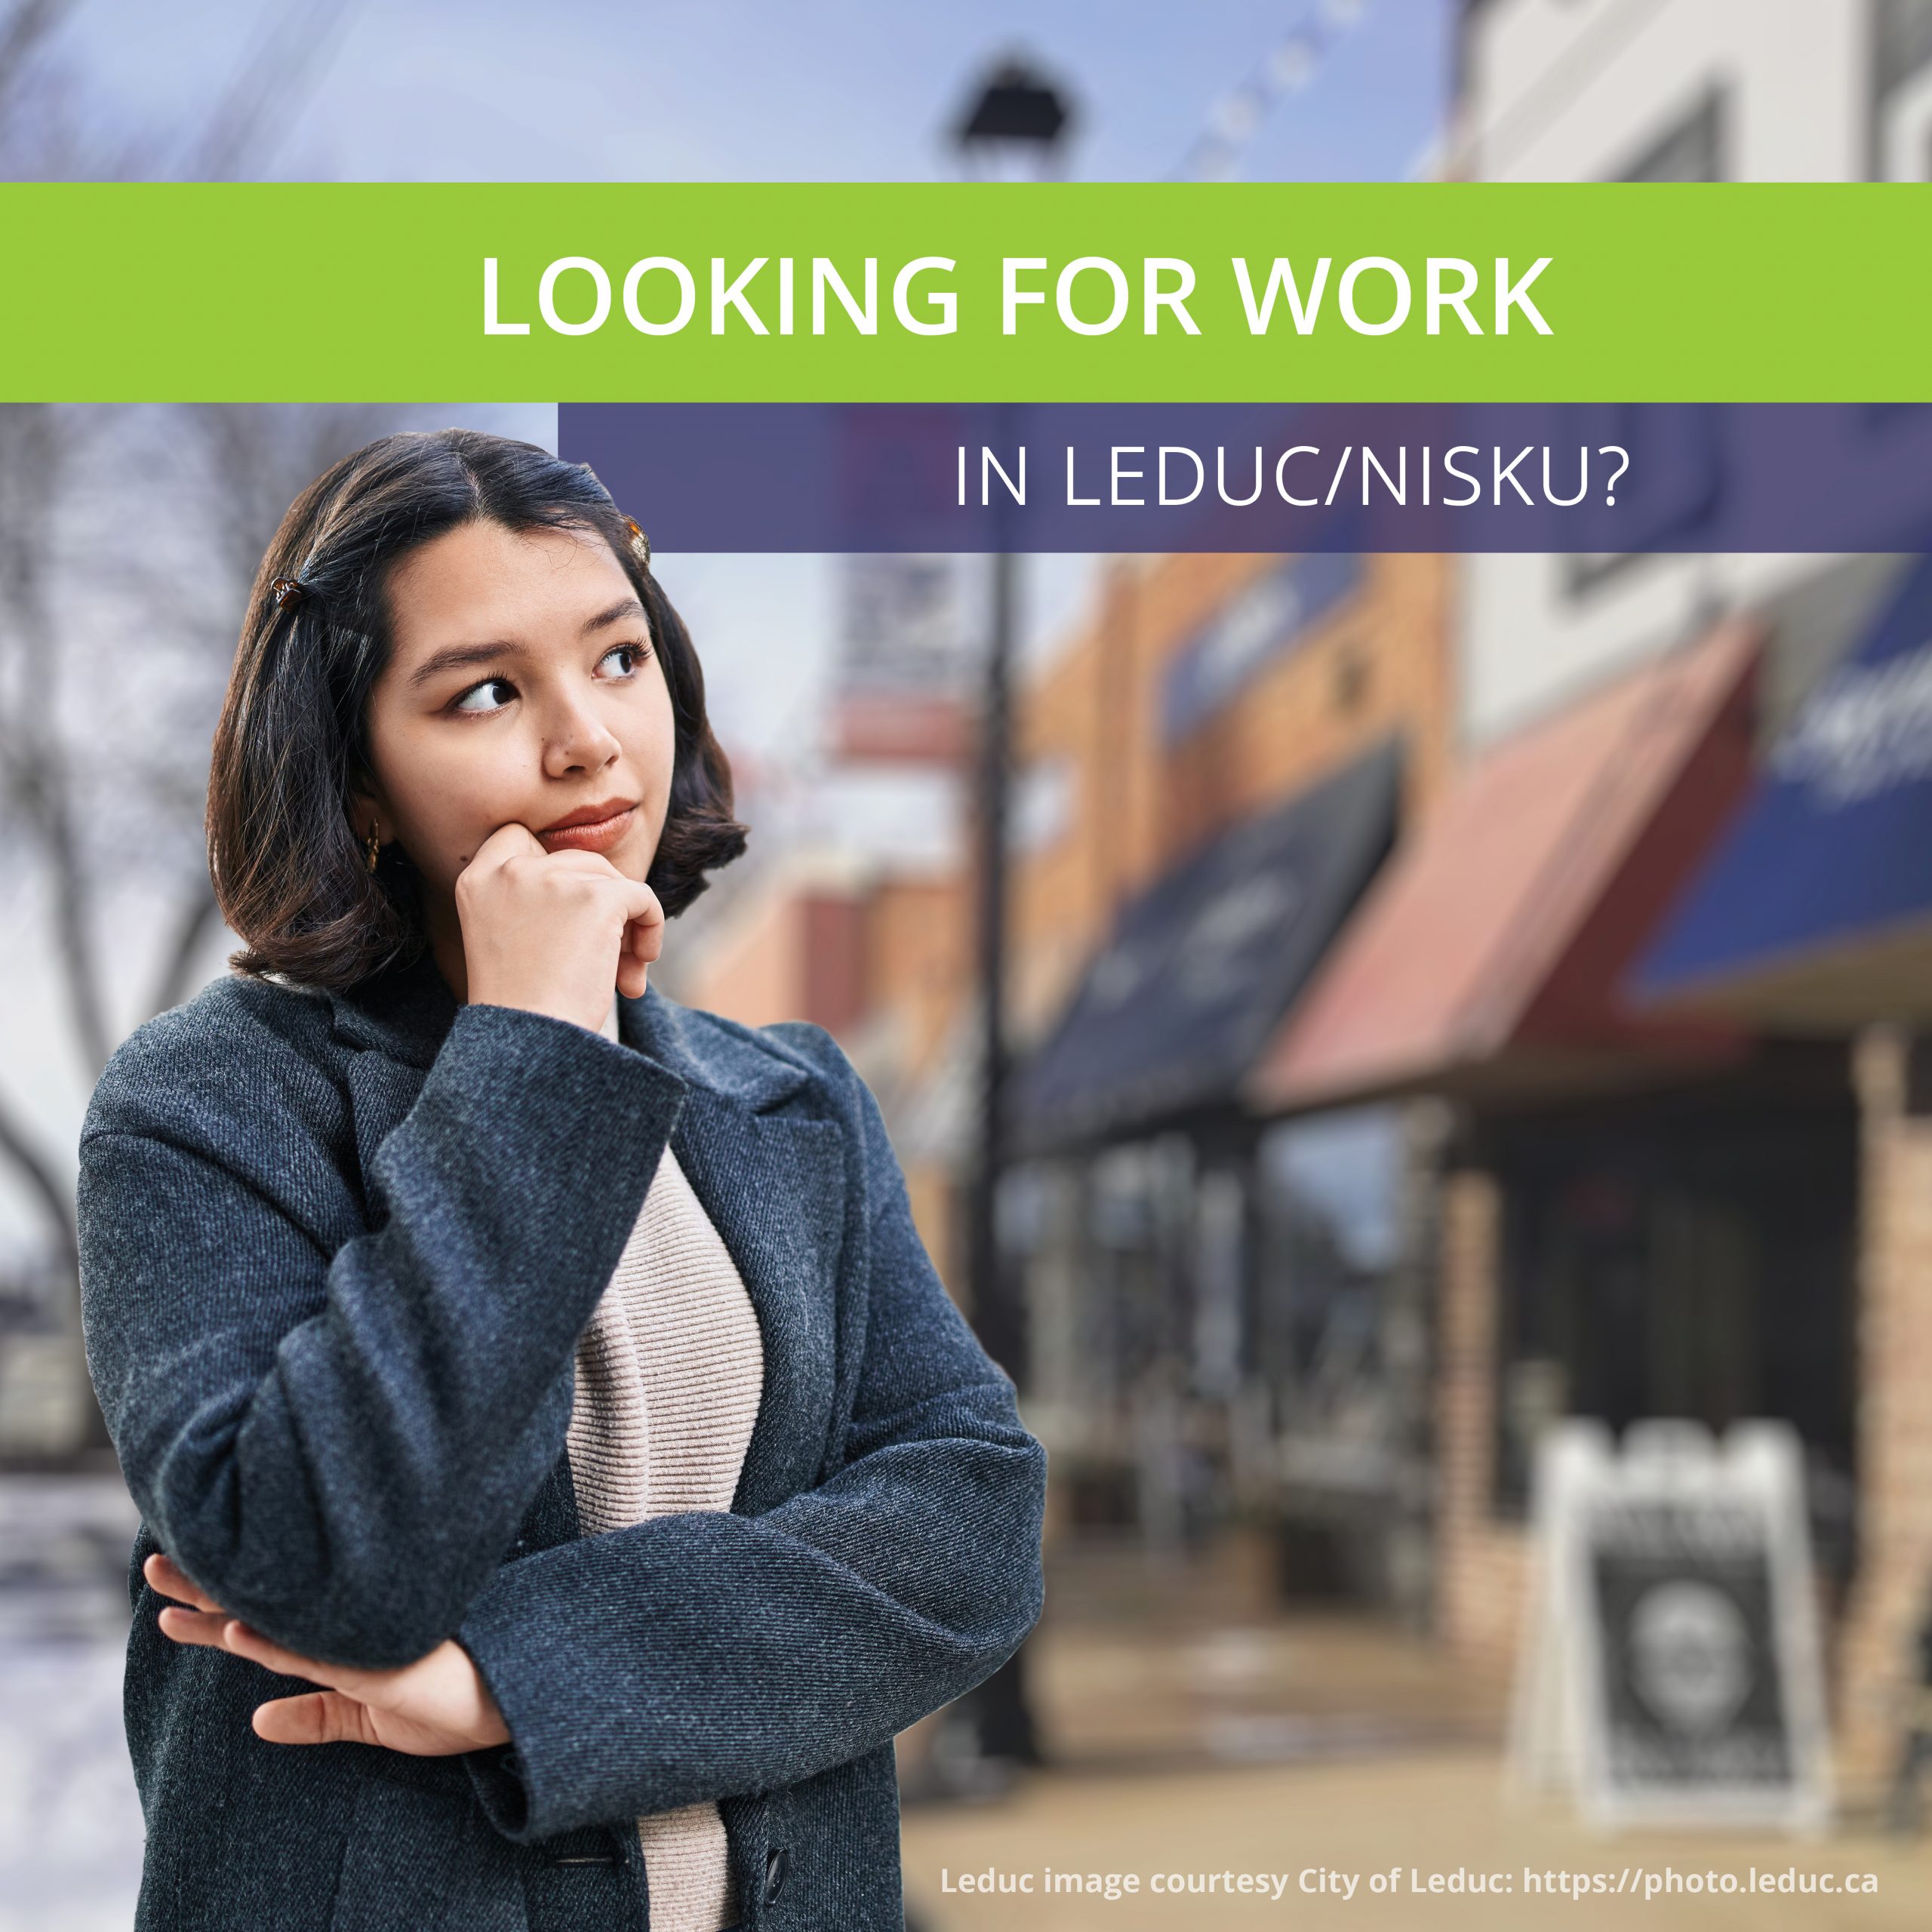 Young woman on Leduc main street looking thoughtful with a caption that says "Looking for work in Leduc/Nisku?